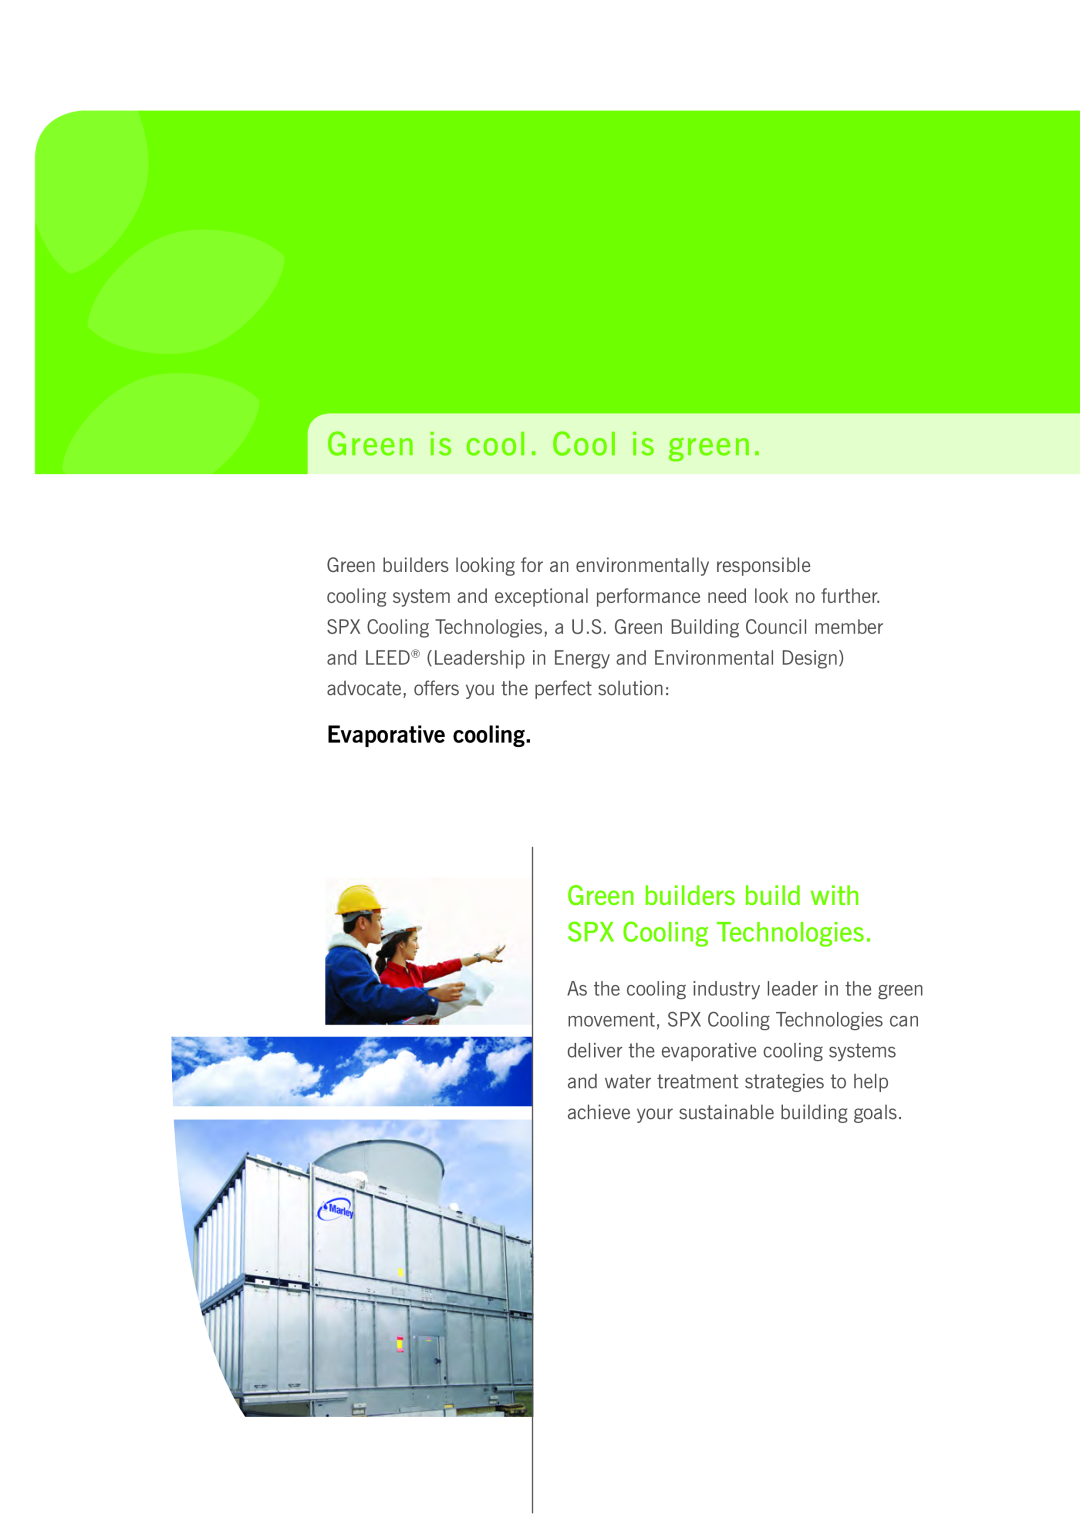 SPX Cooling Technologies Evaporative Cooling Green builders build with, SPX Cooling Technologies, Evaporative cooling 